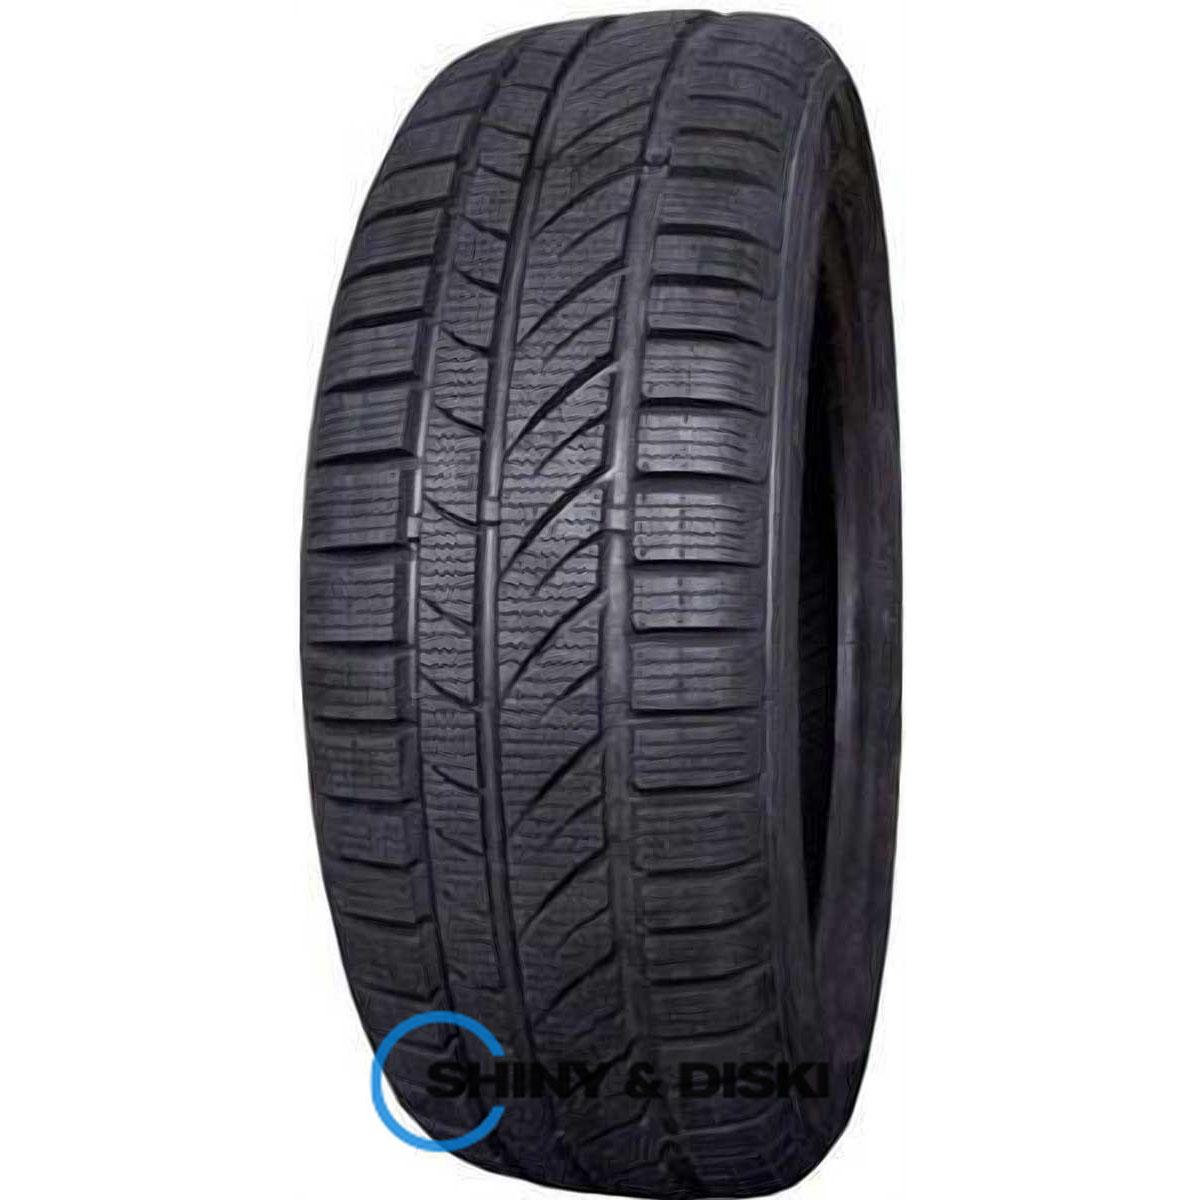 infinity inf-049 215/60 r16 99h